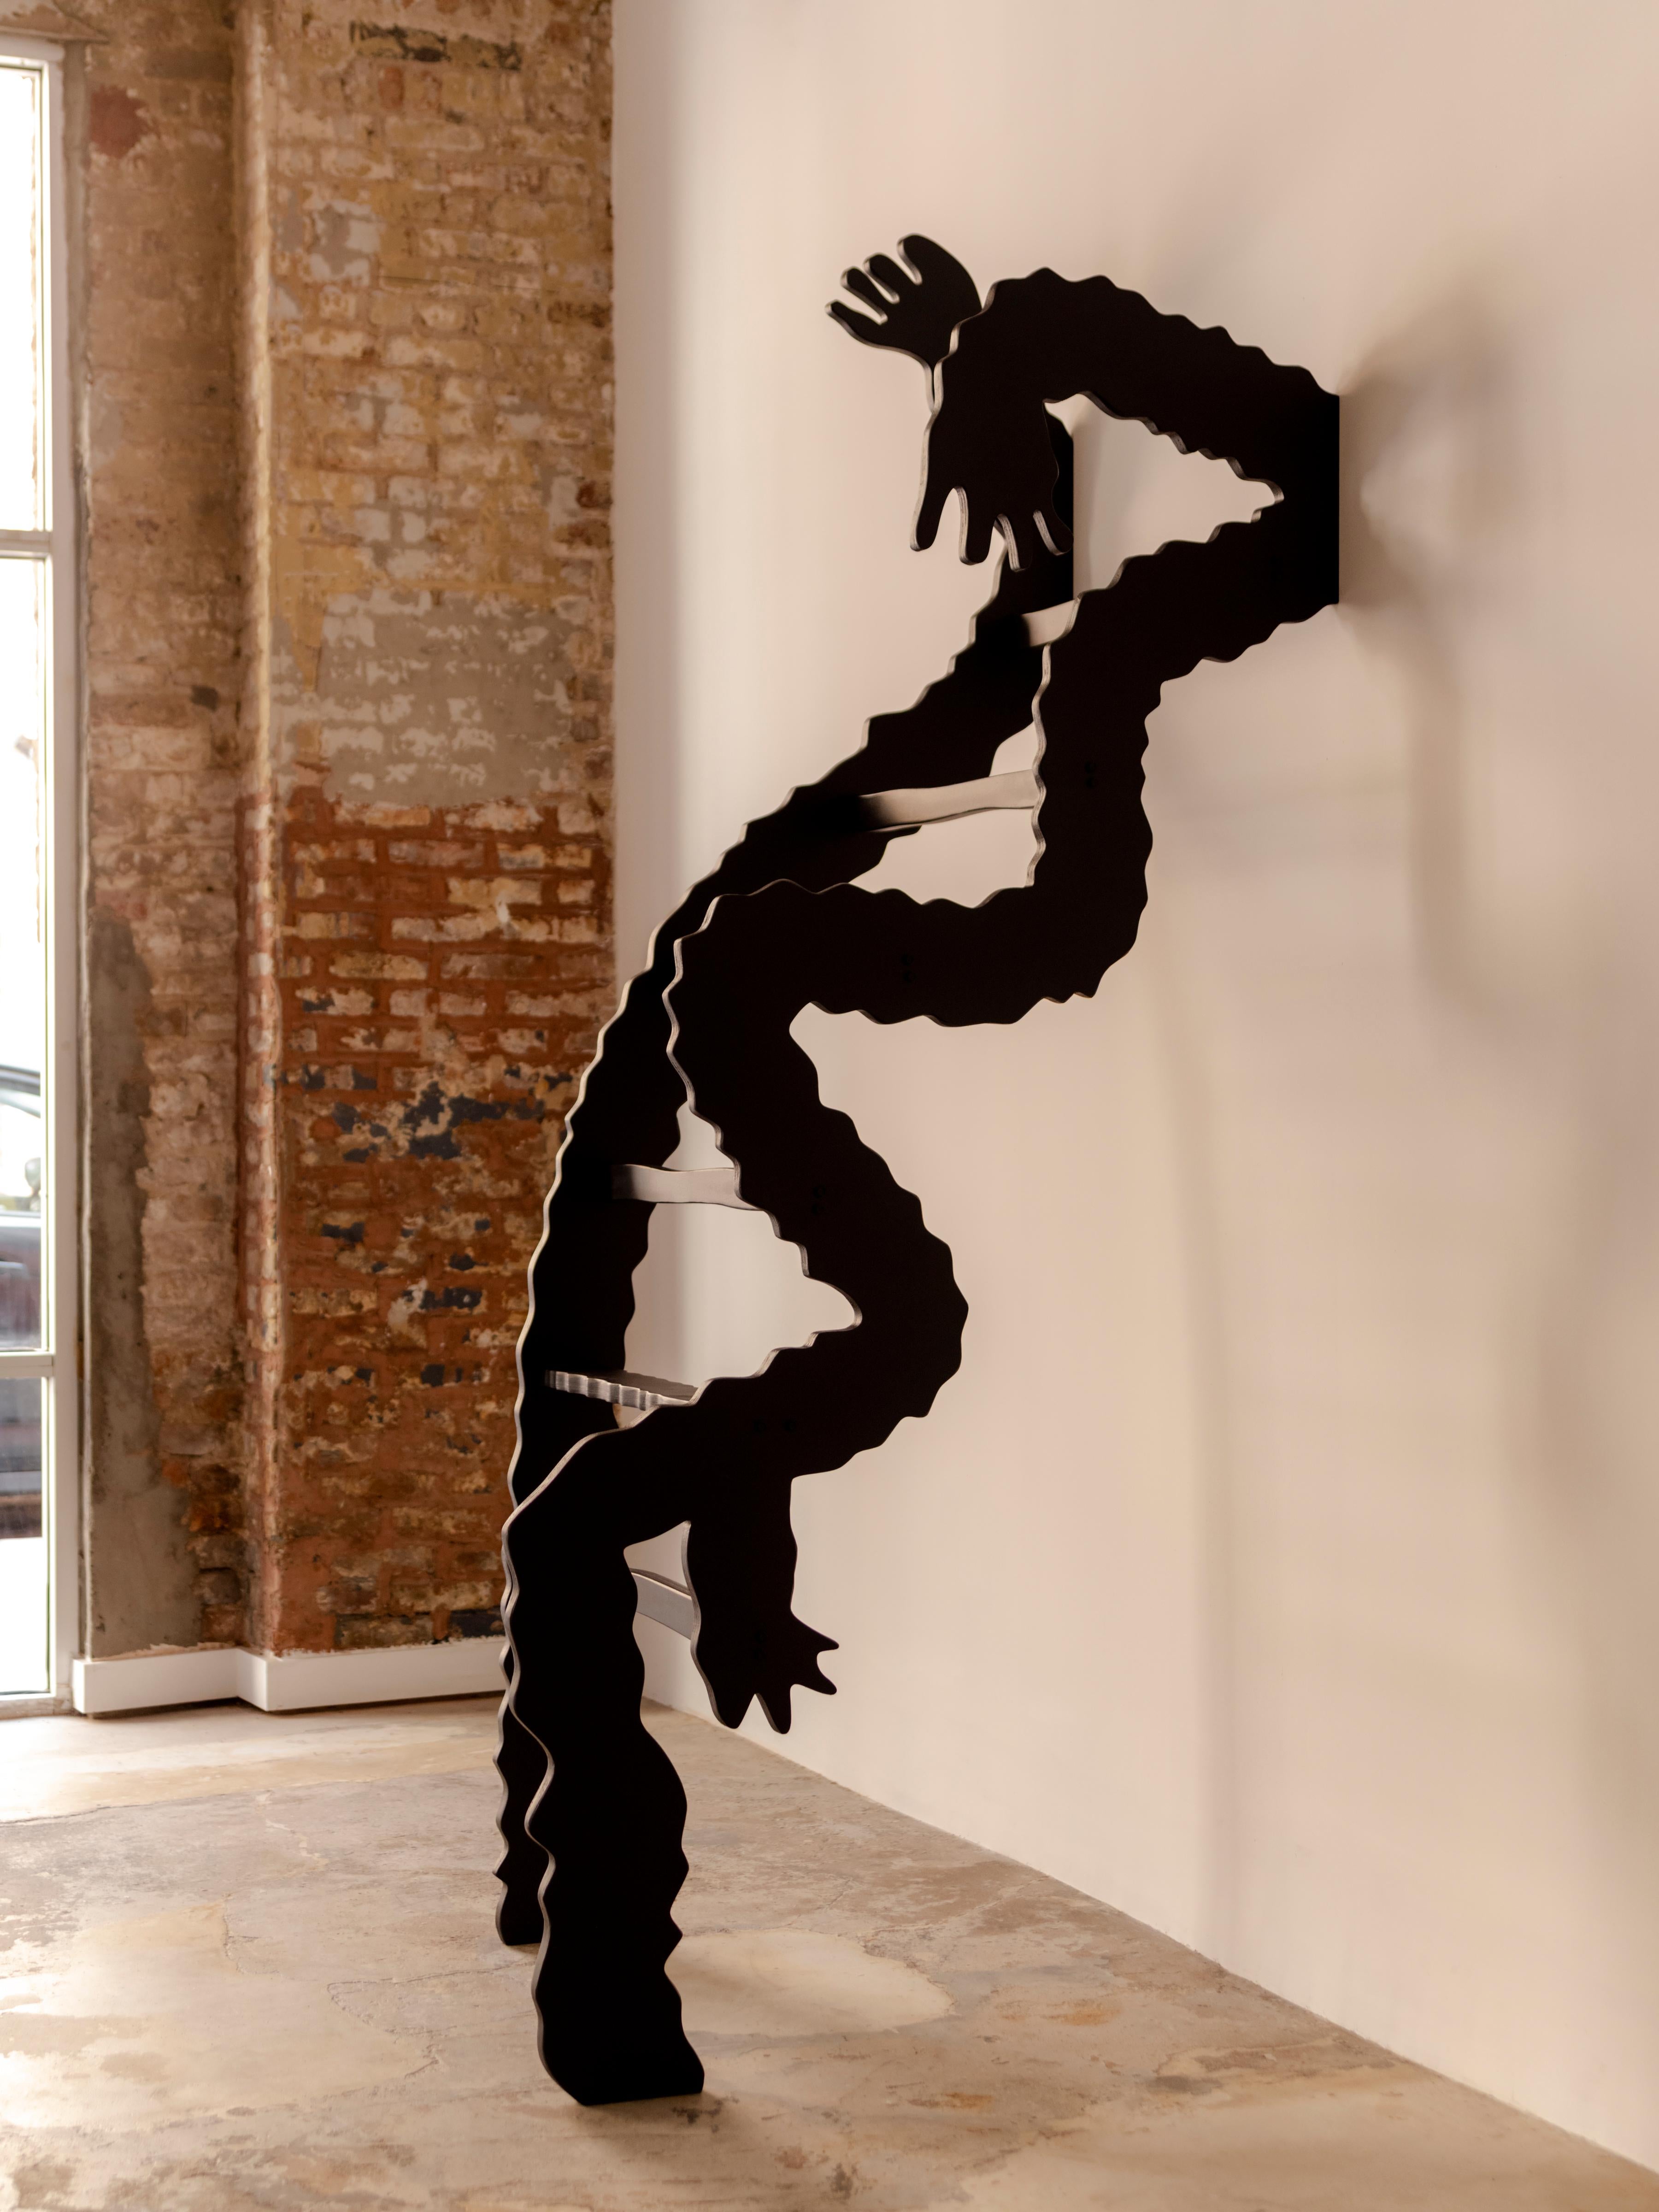 The ladder installation called “The Monster” combines large black, whimsical, and abstract shapes that mimic arms and hands.
Installation and shipment to be quoted separately. 